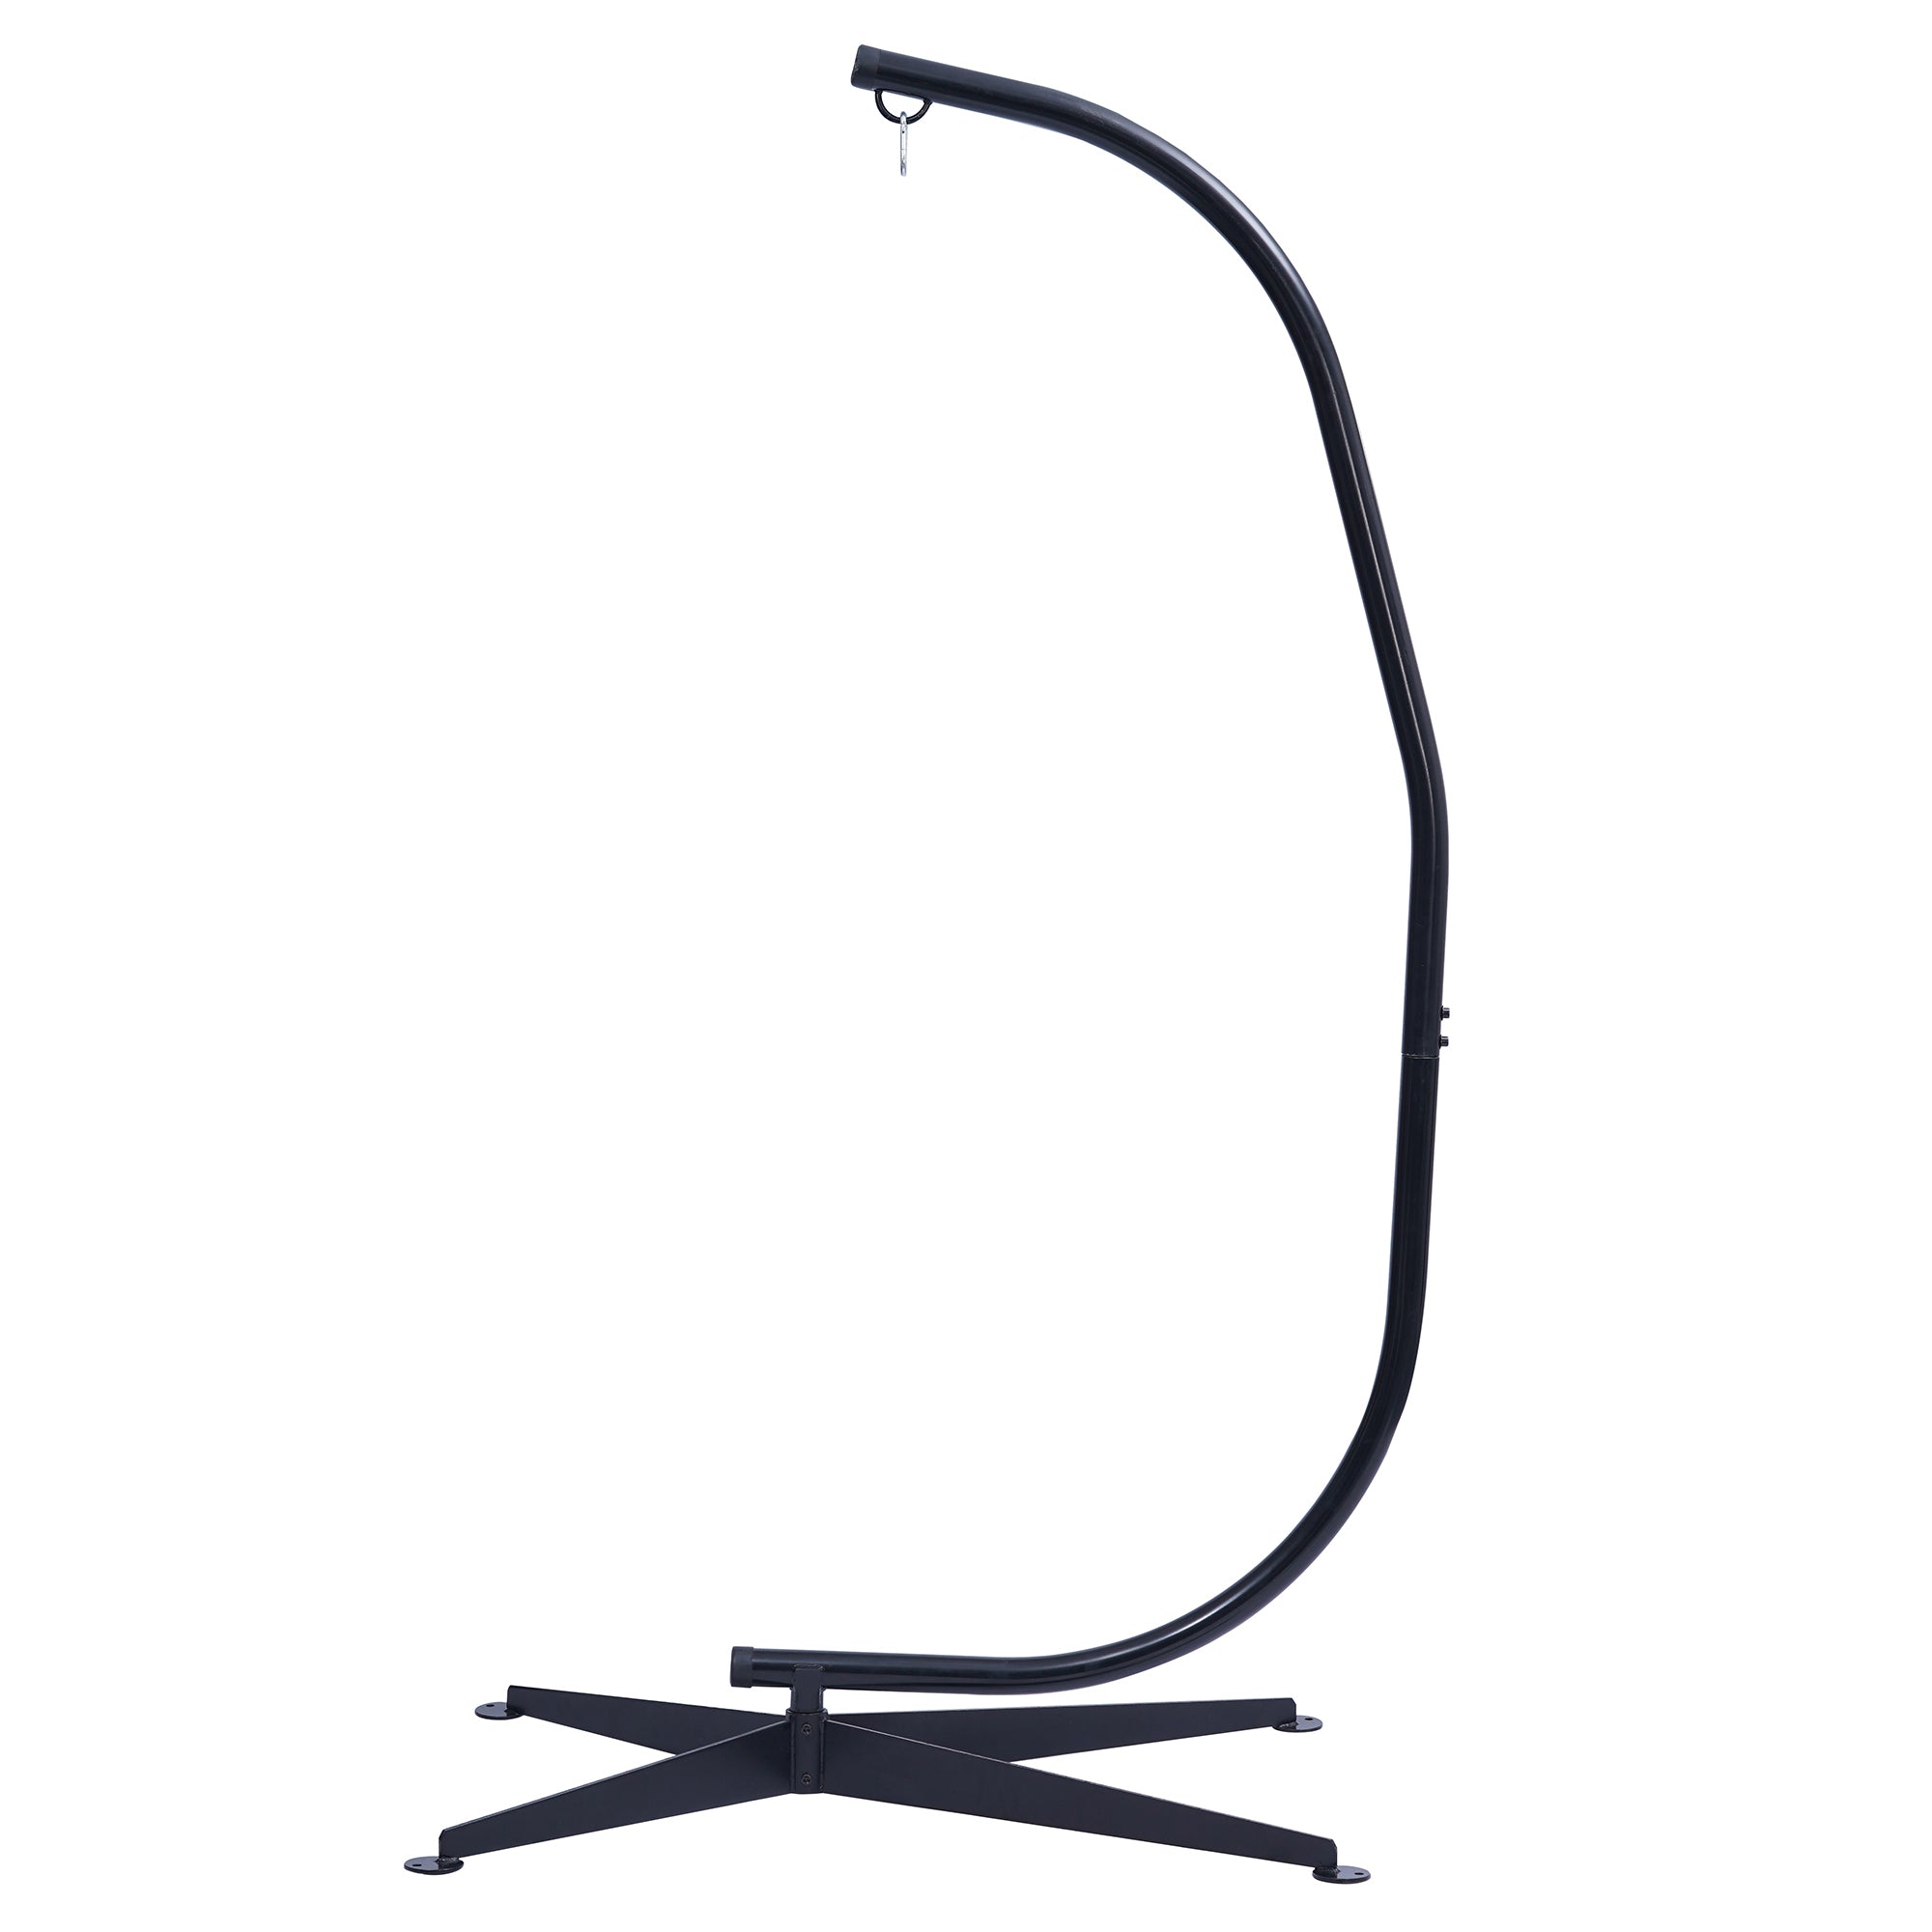 Hammock Chair Stand Only - Metal C-Stand for Hanging Hammock Chair,Porch Swing - Indoor or Outdoor Use - Durable 300 Pound Capacity,Black